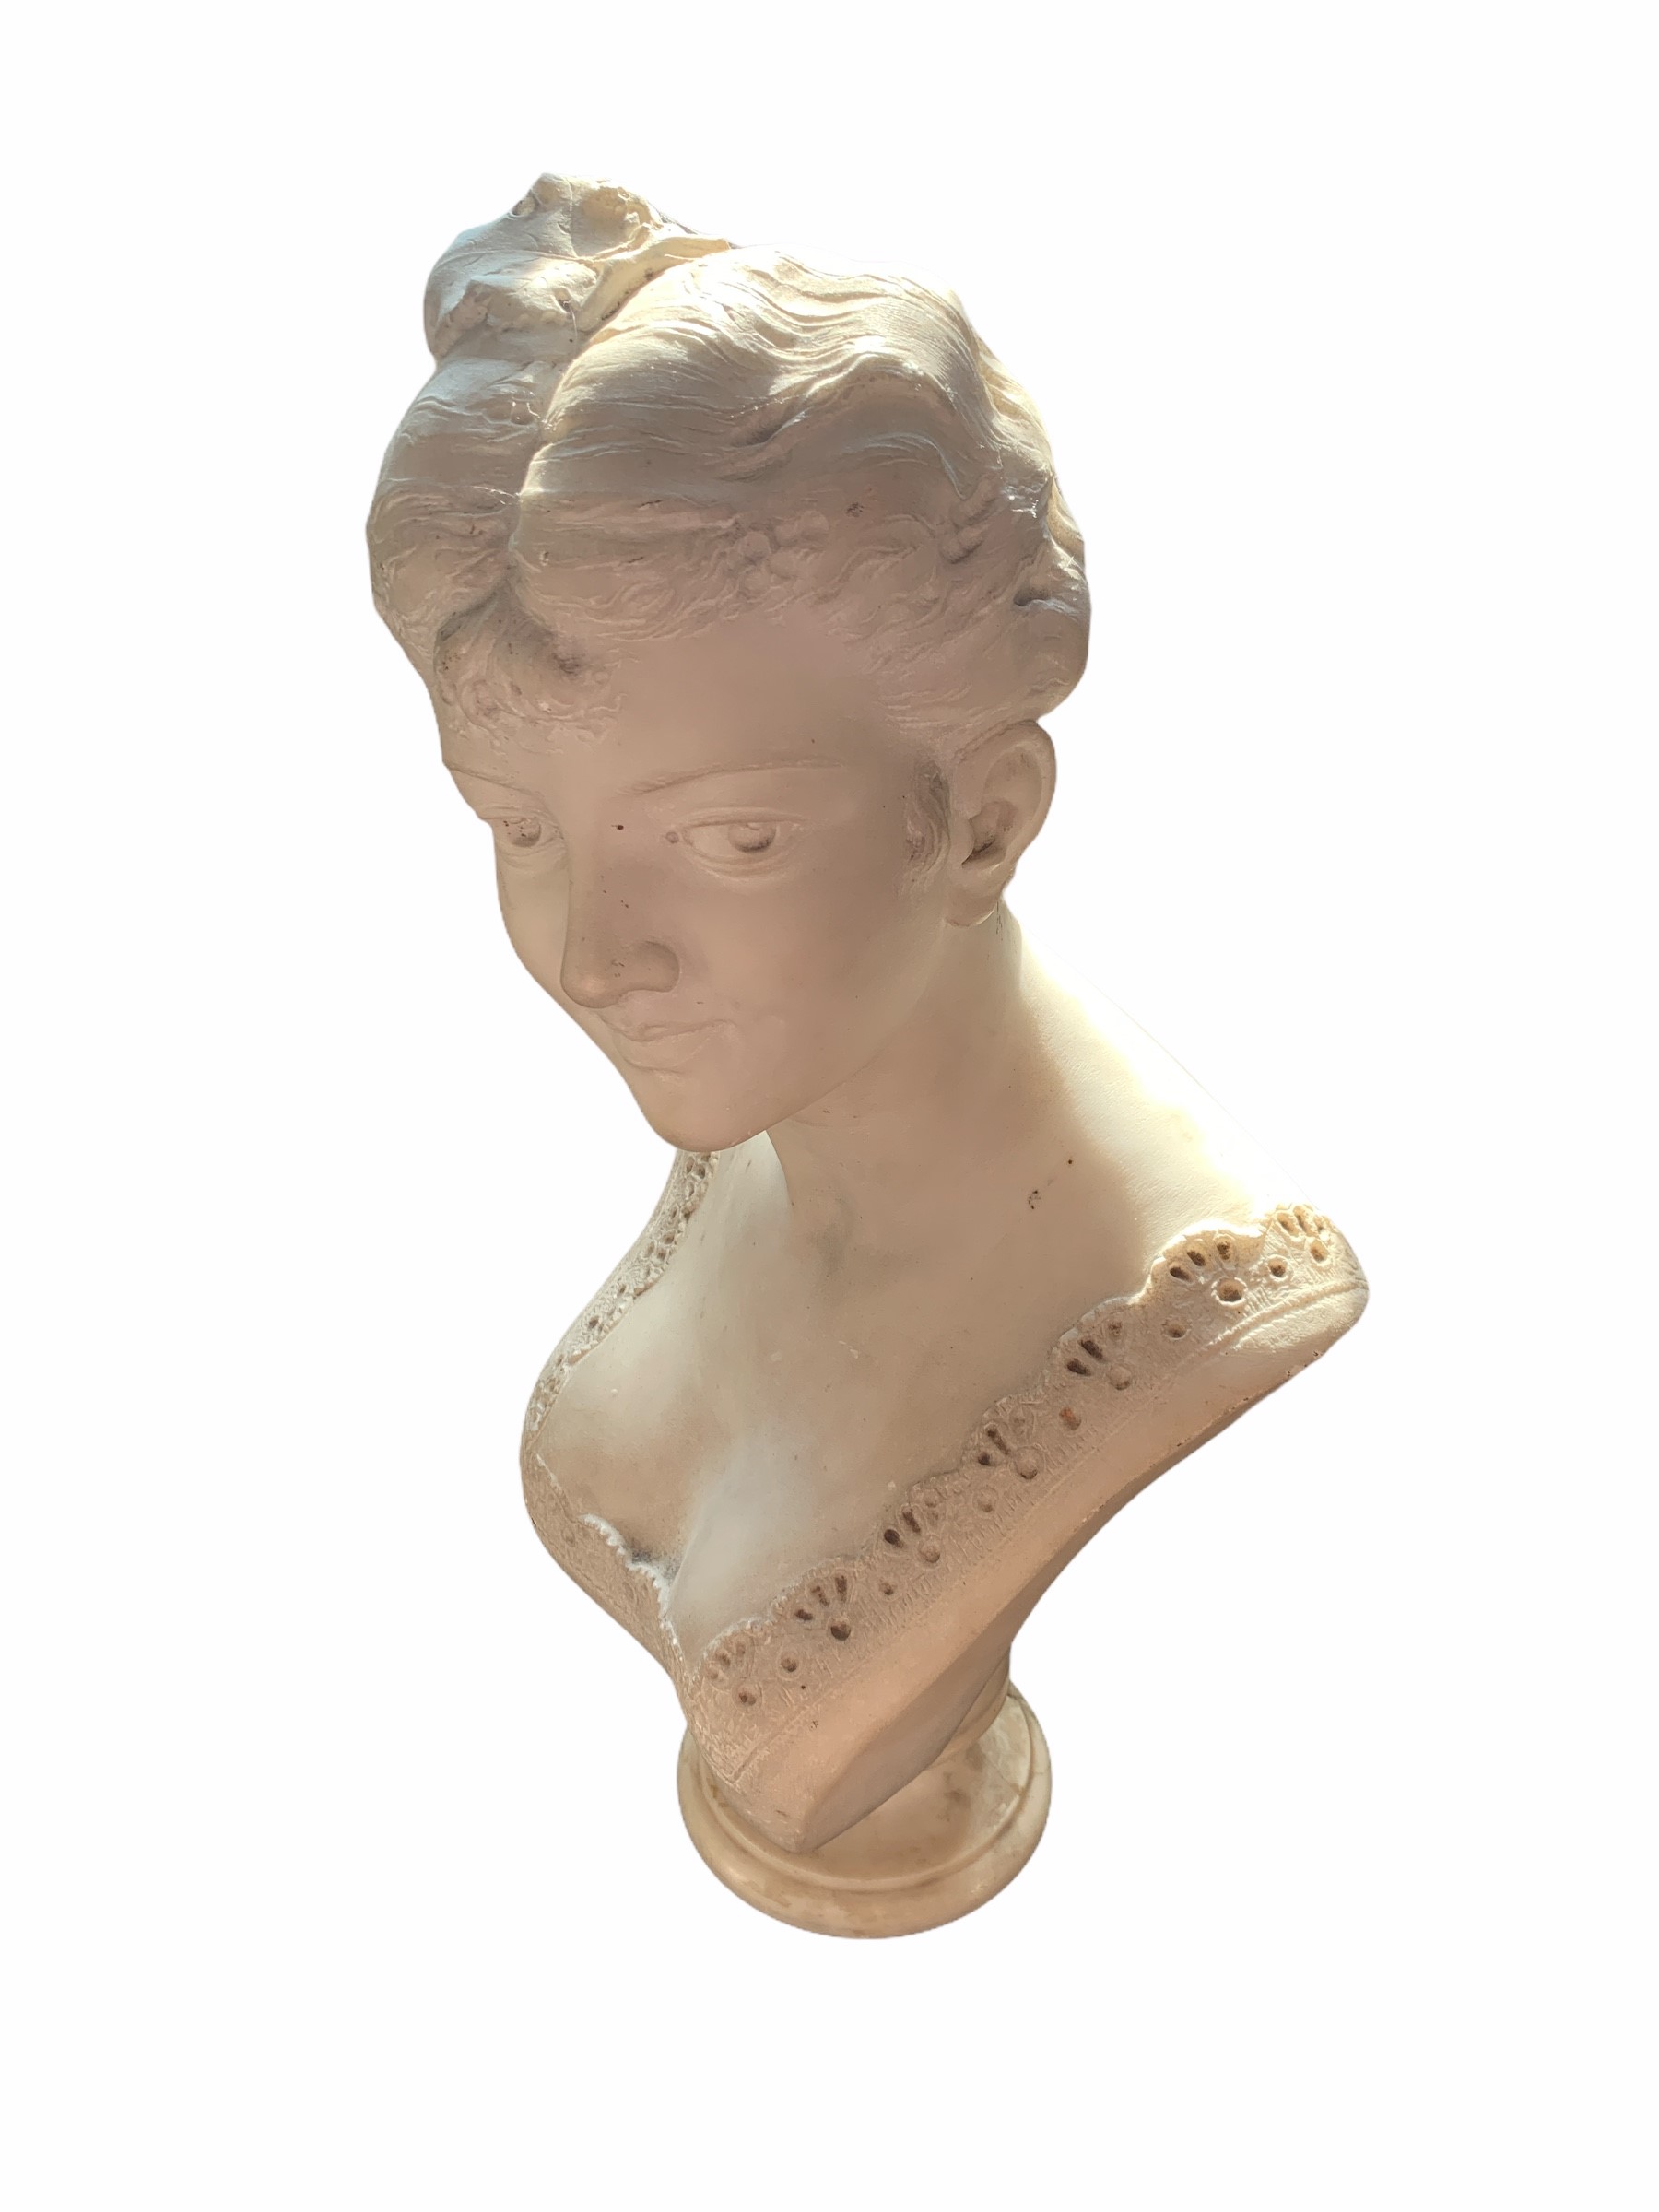 A 19TH CENTURY ITALIAN MARBLE BUST OF AN ELEGANT YOUNG LADY Raised on a socle base. (h 55cm x w 28cm